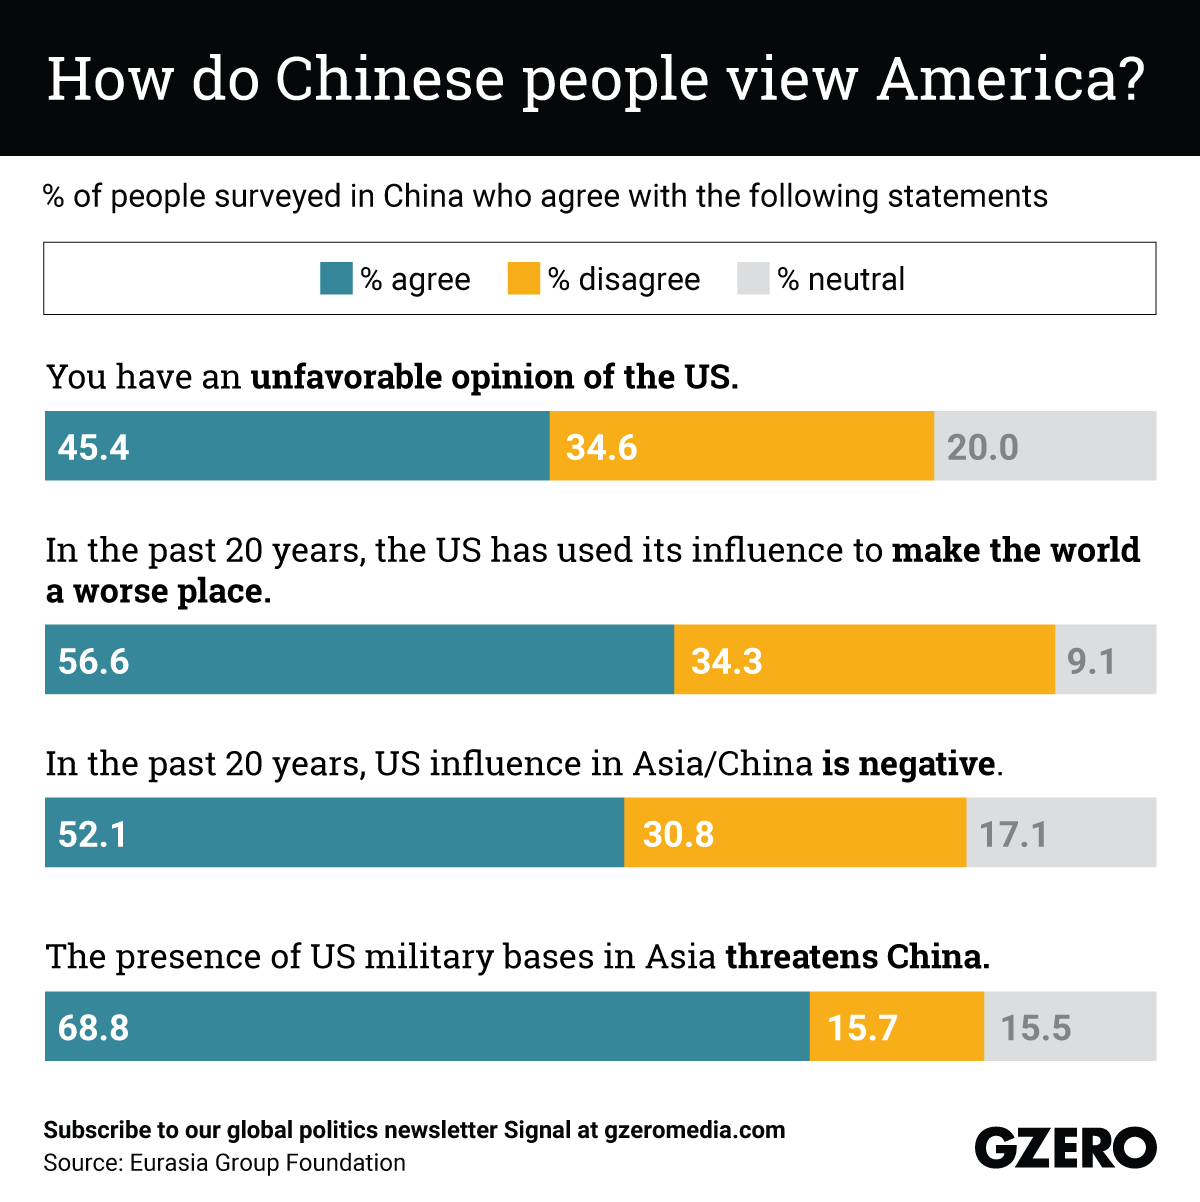 The Graphic Truth: How do Chinese people view America?